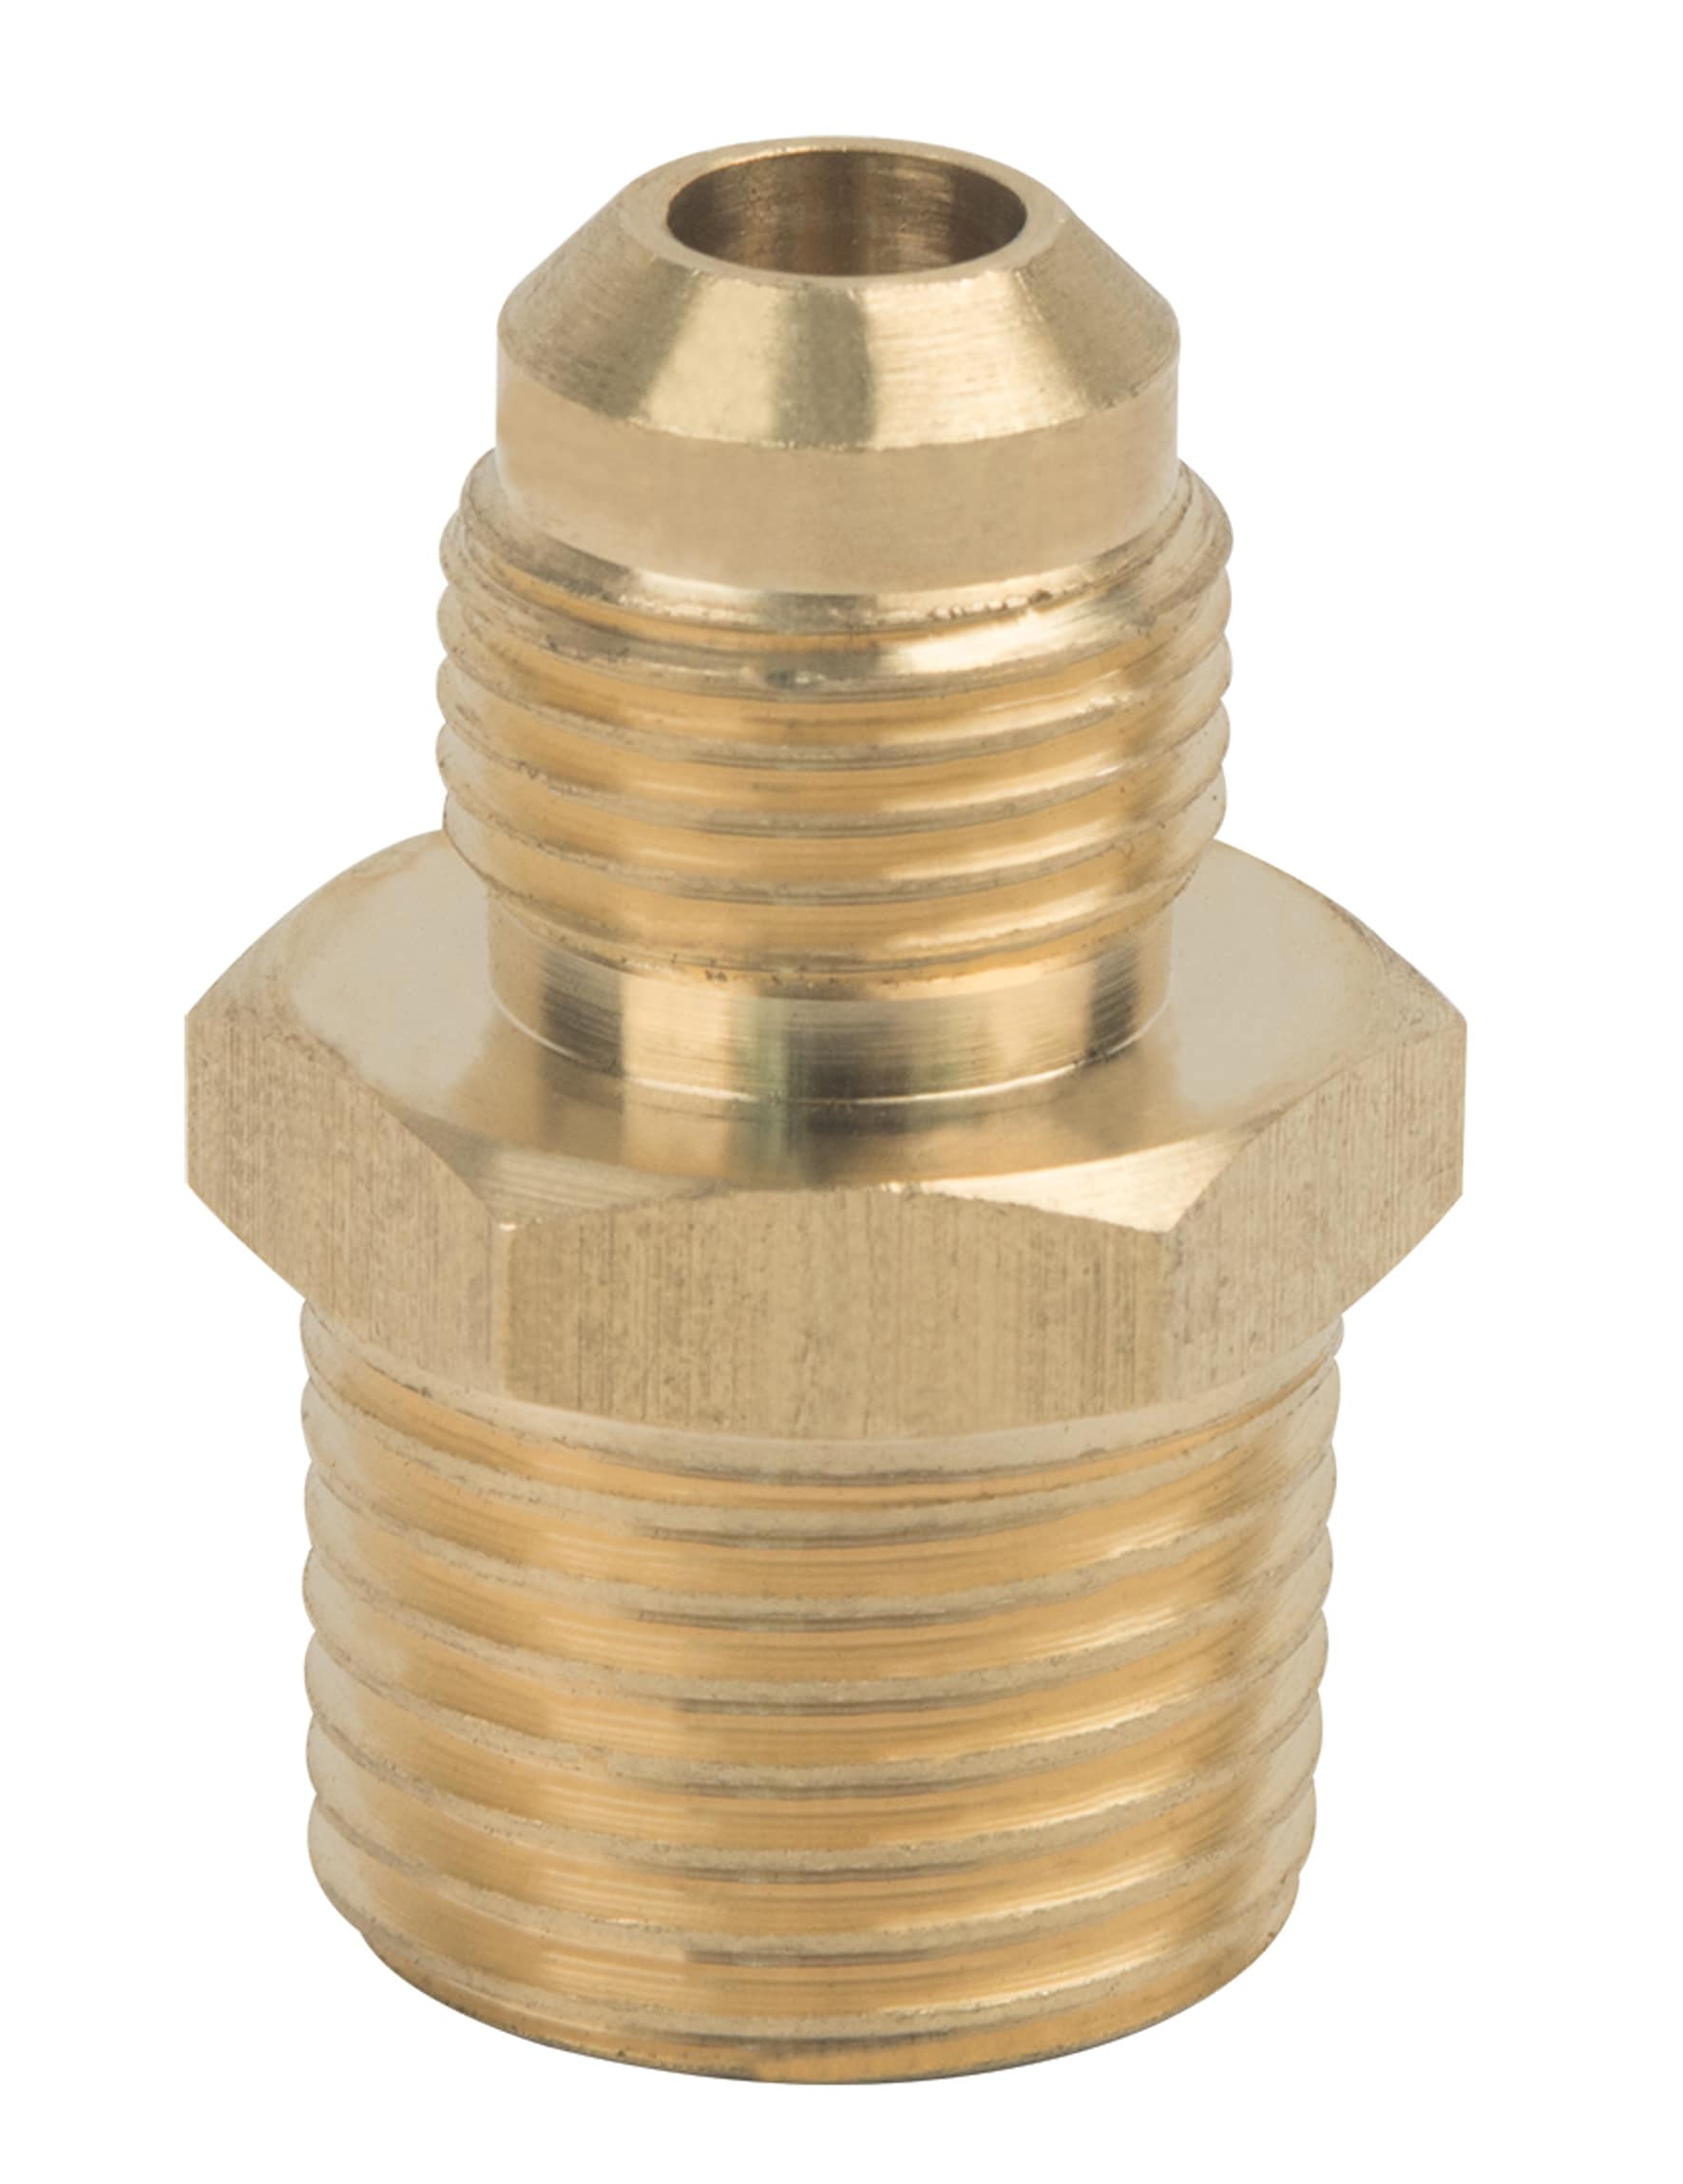 Storm 1/2" Male to 3/8" Female Adapter 